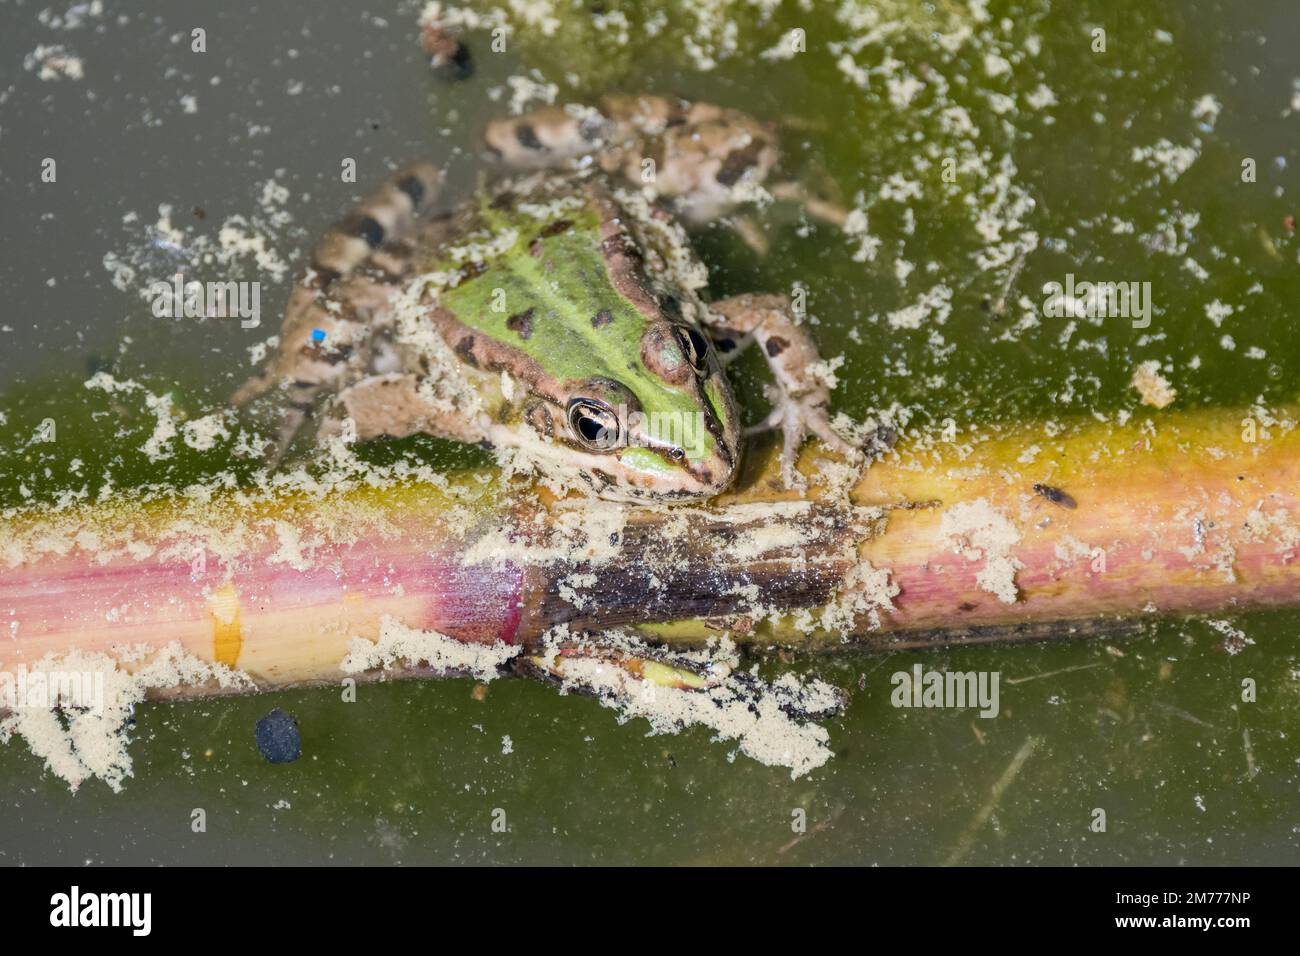 Iberian green frog, Pelophylax perezi, on a branch in the middle of the pond Stock Photo